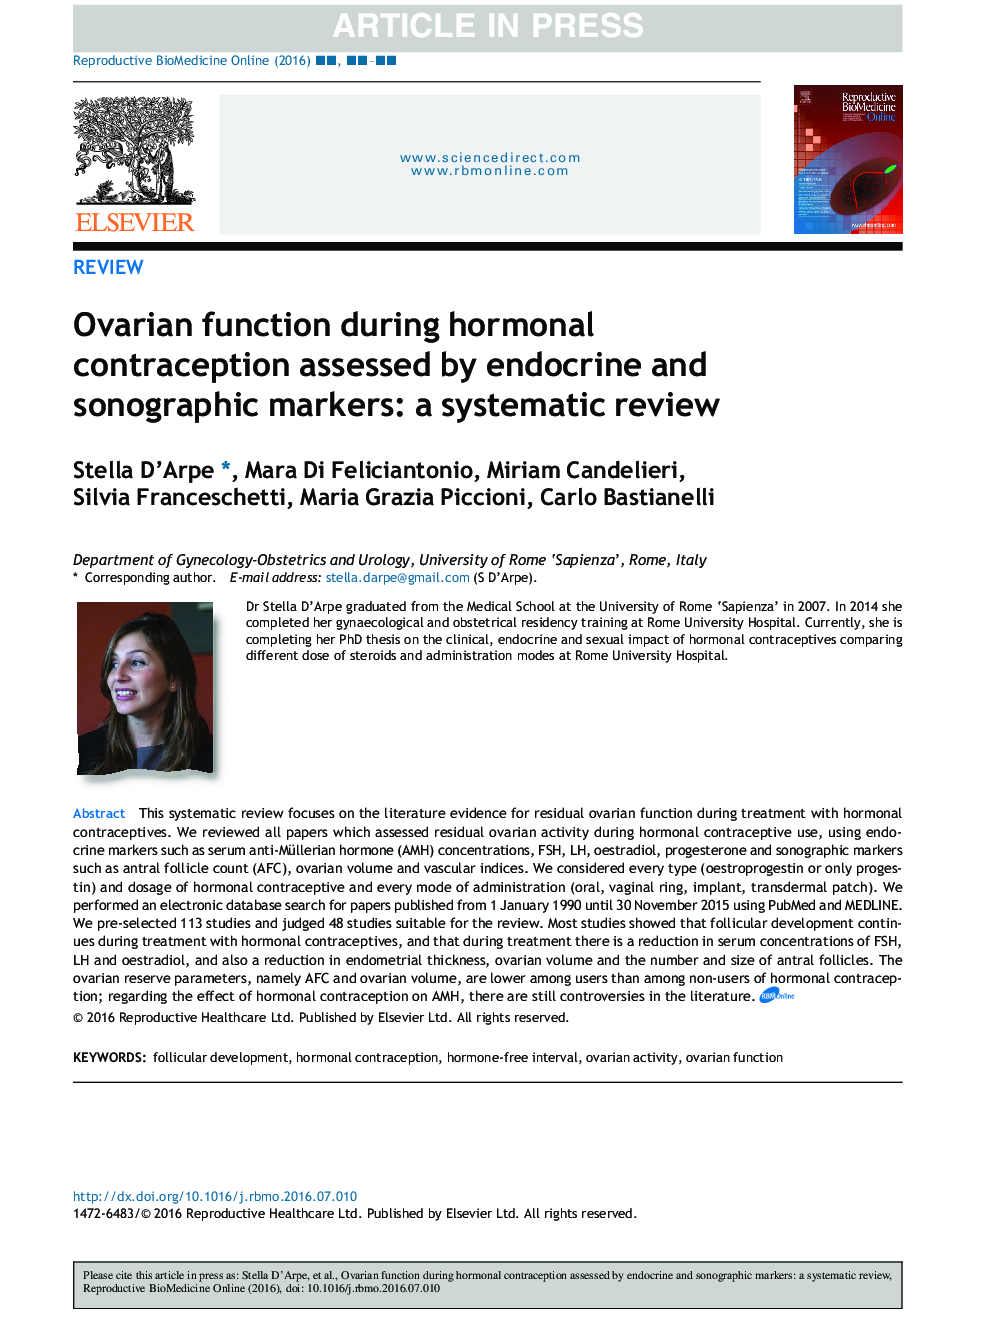 Ovarian function during hormonal contraception assessed by endocrine and sonographic markers: a systematic review